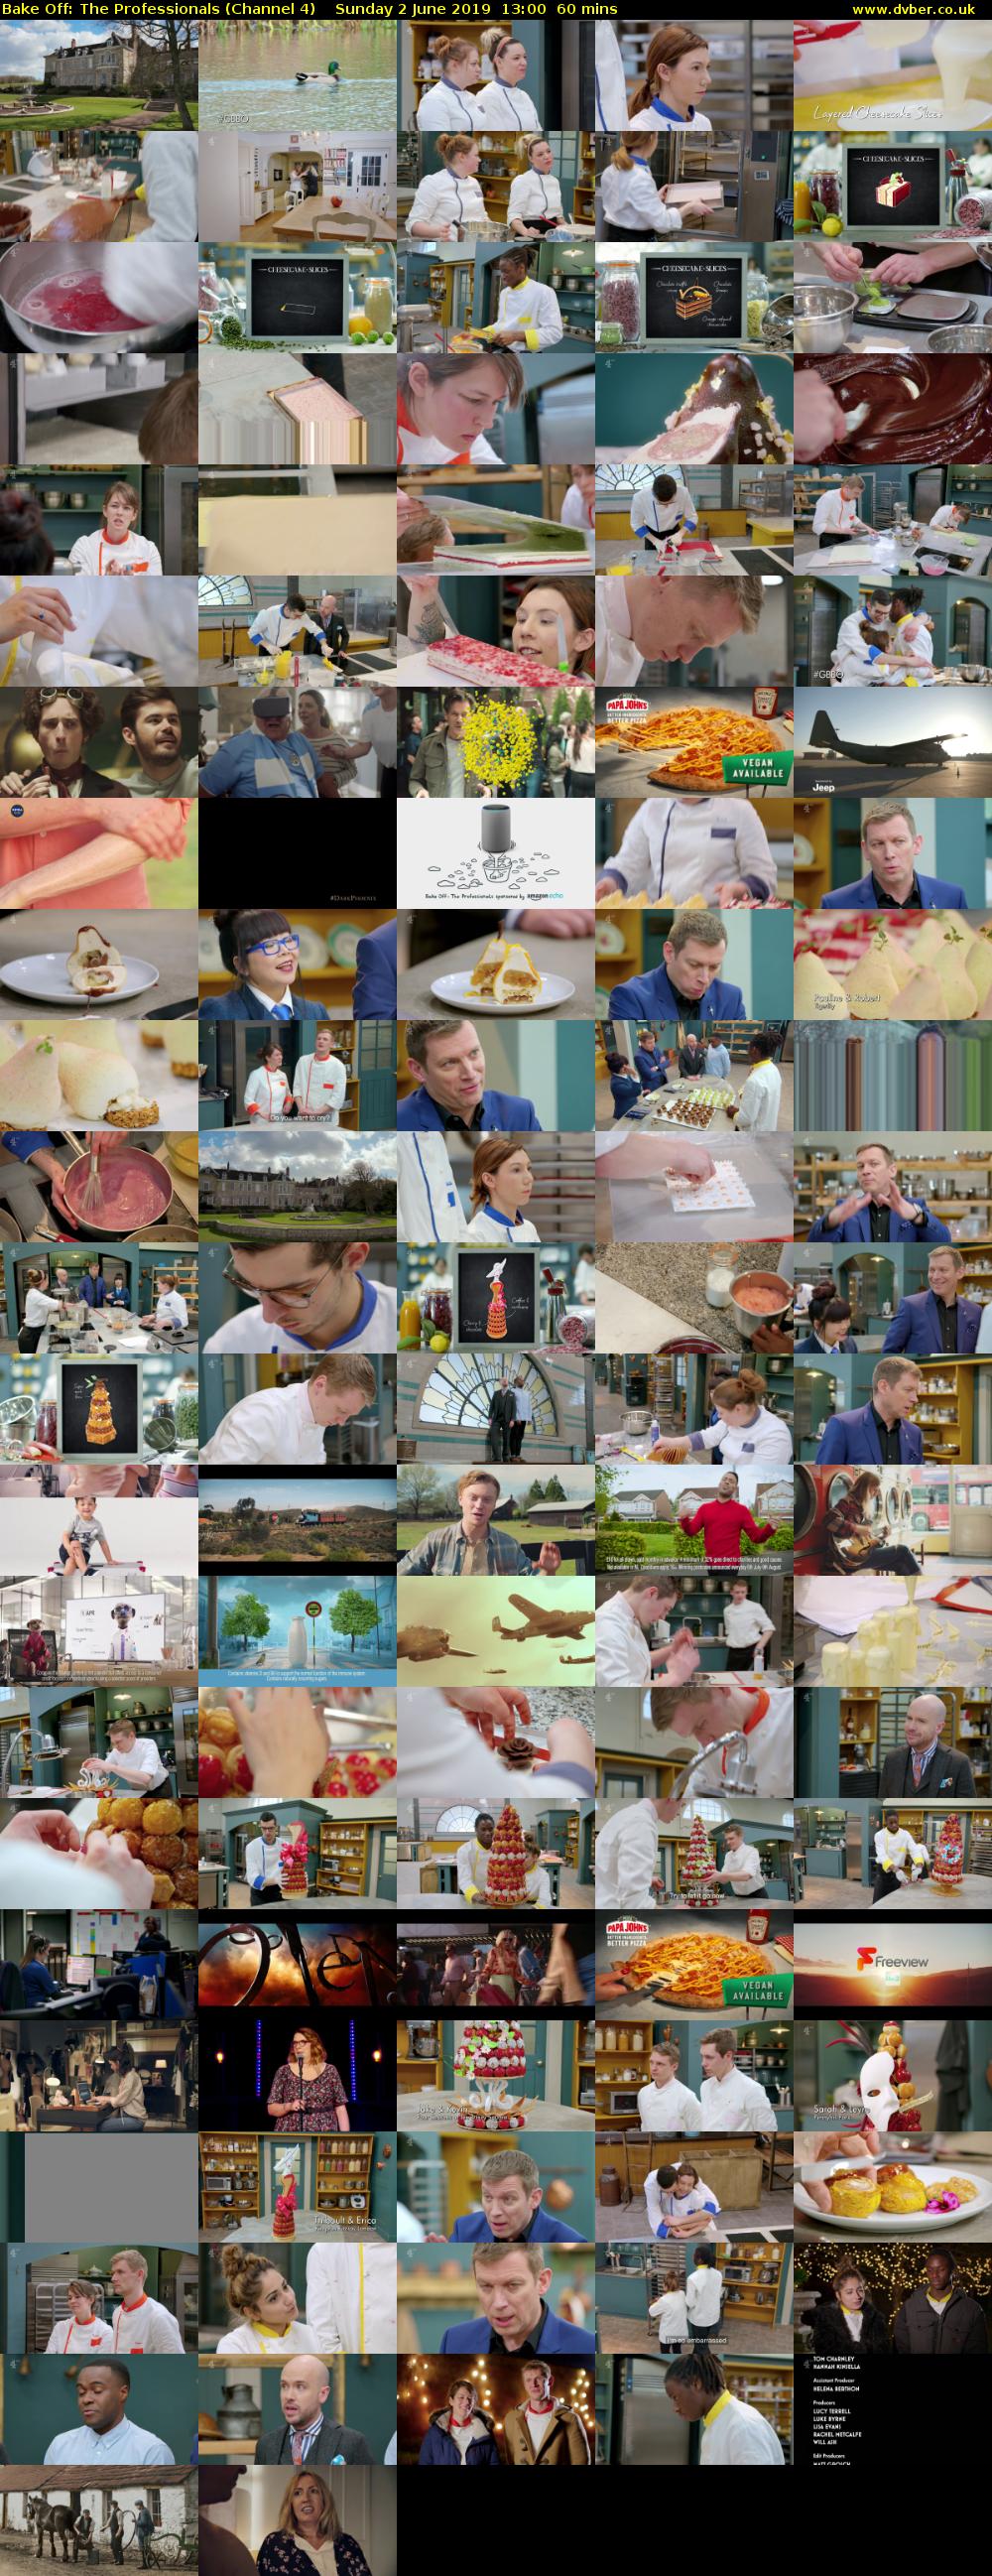 Bake Off: The Professionals (Channel 4) Sunday 2 June 2019 13:00 - 14:00